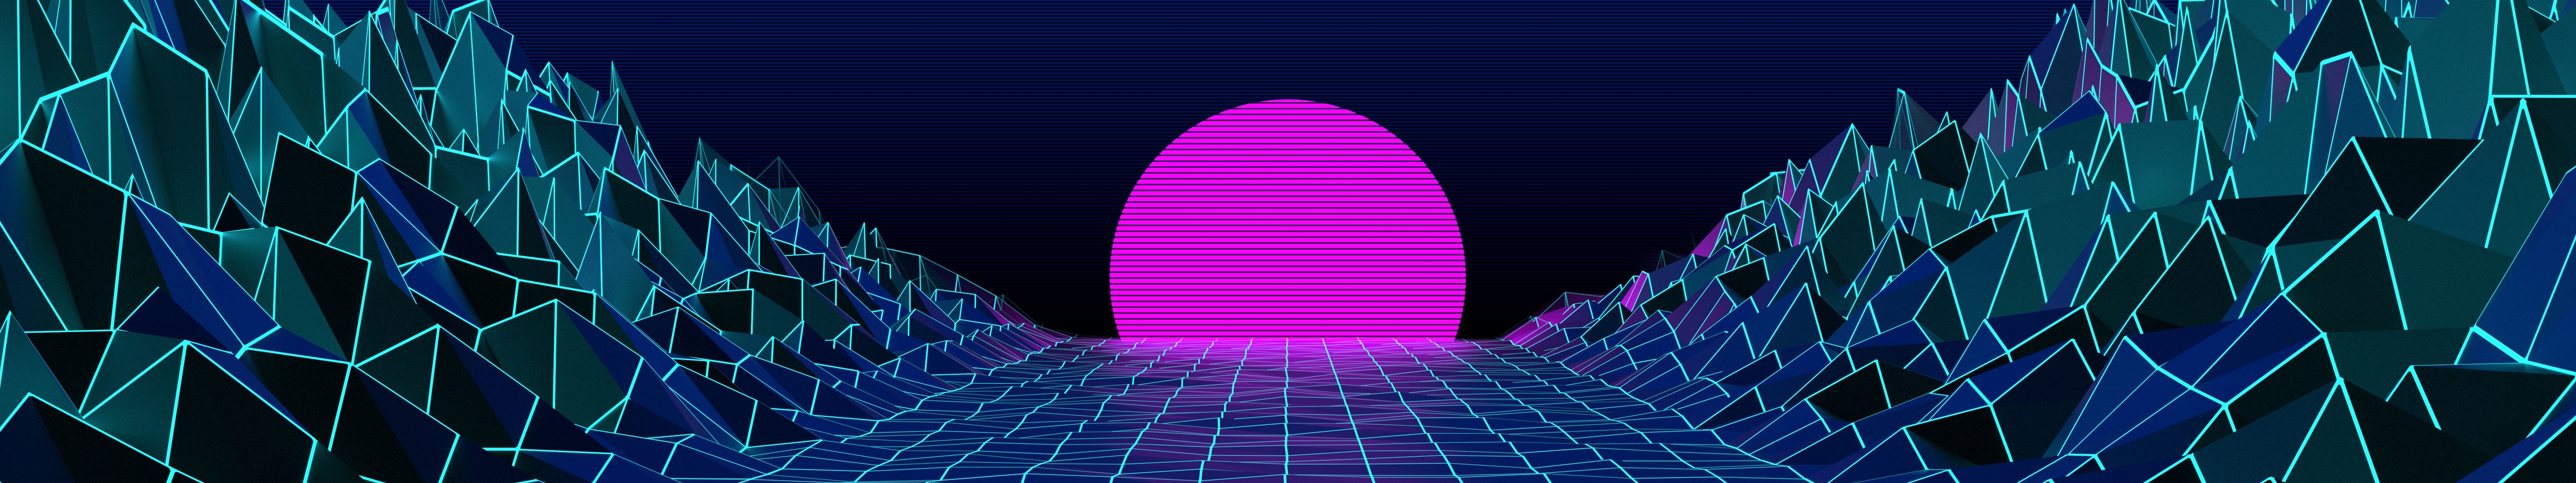 Request Does anyone have any other Cyber Punk / Vapor Wave Triple monitor wallpaper like this? I love the aesthetic especially with three monitors, but I can't find anymore for 3 monitors